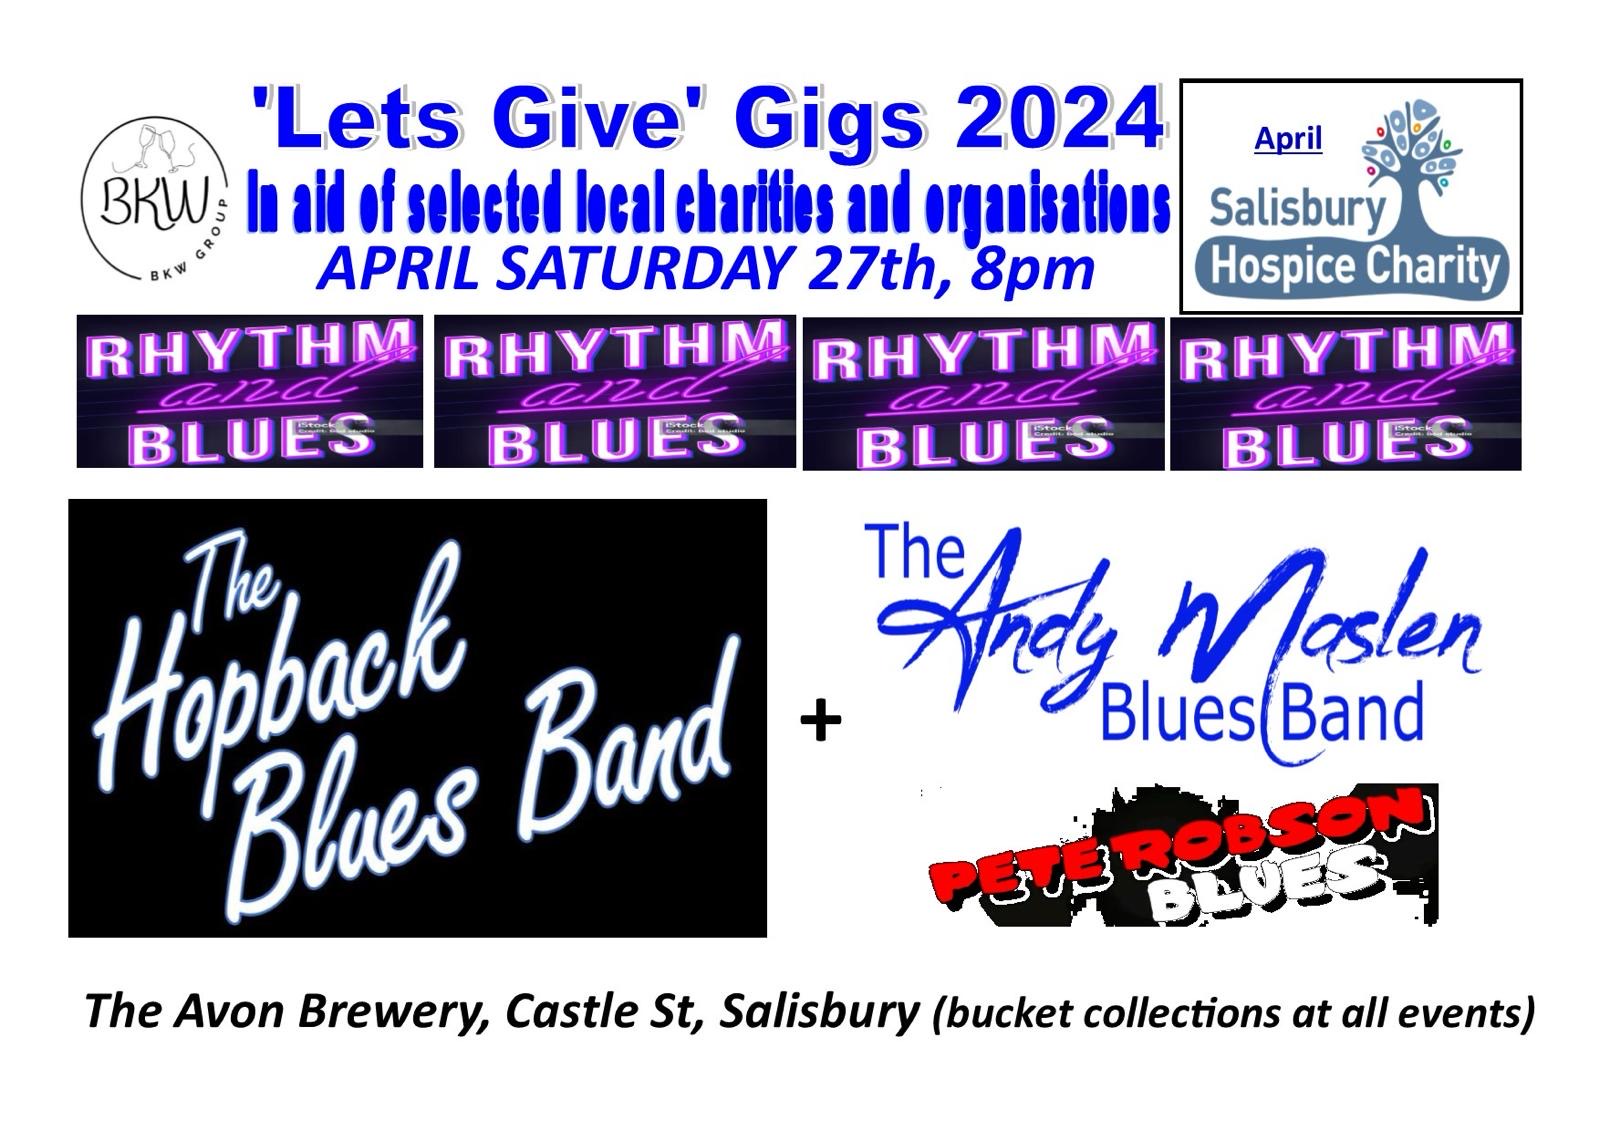 Salisbury Live Event in aid of Salisbury Hospice Charity: The Hopback Blues Band + The Andy Maslen Blues Band + Pete Robson Blues